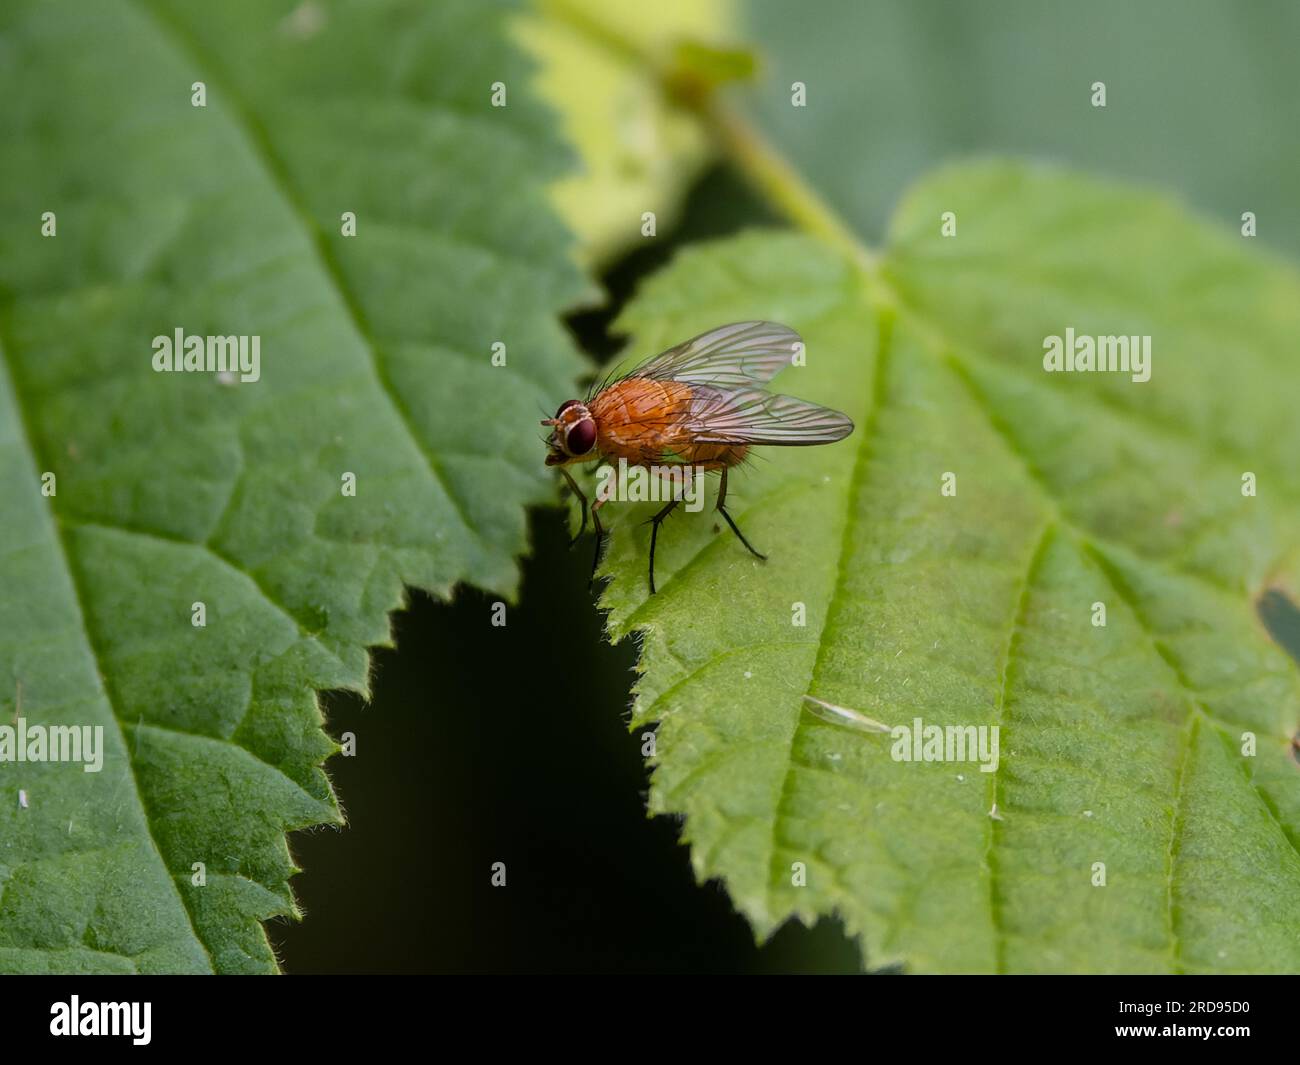 Phaonia pallida, the muscid fly or orange muscid fly, perched on a bramble leaf. Stock Photo